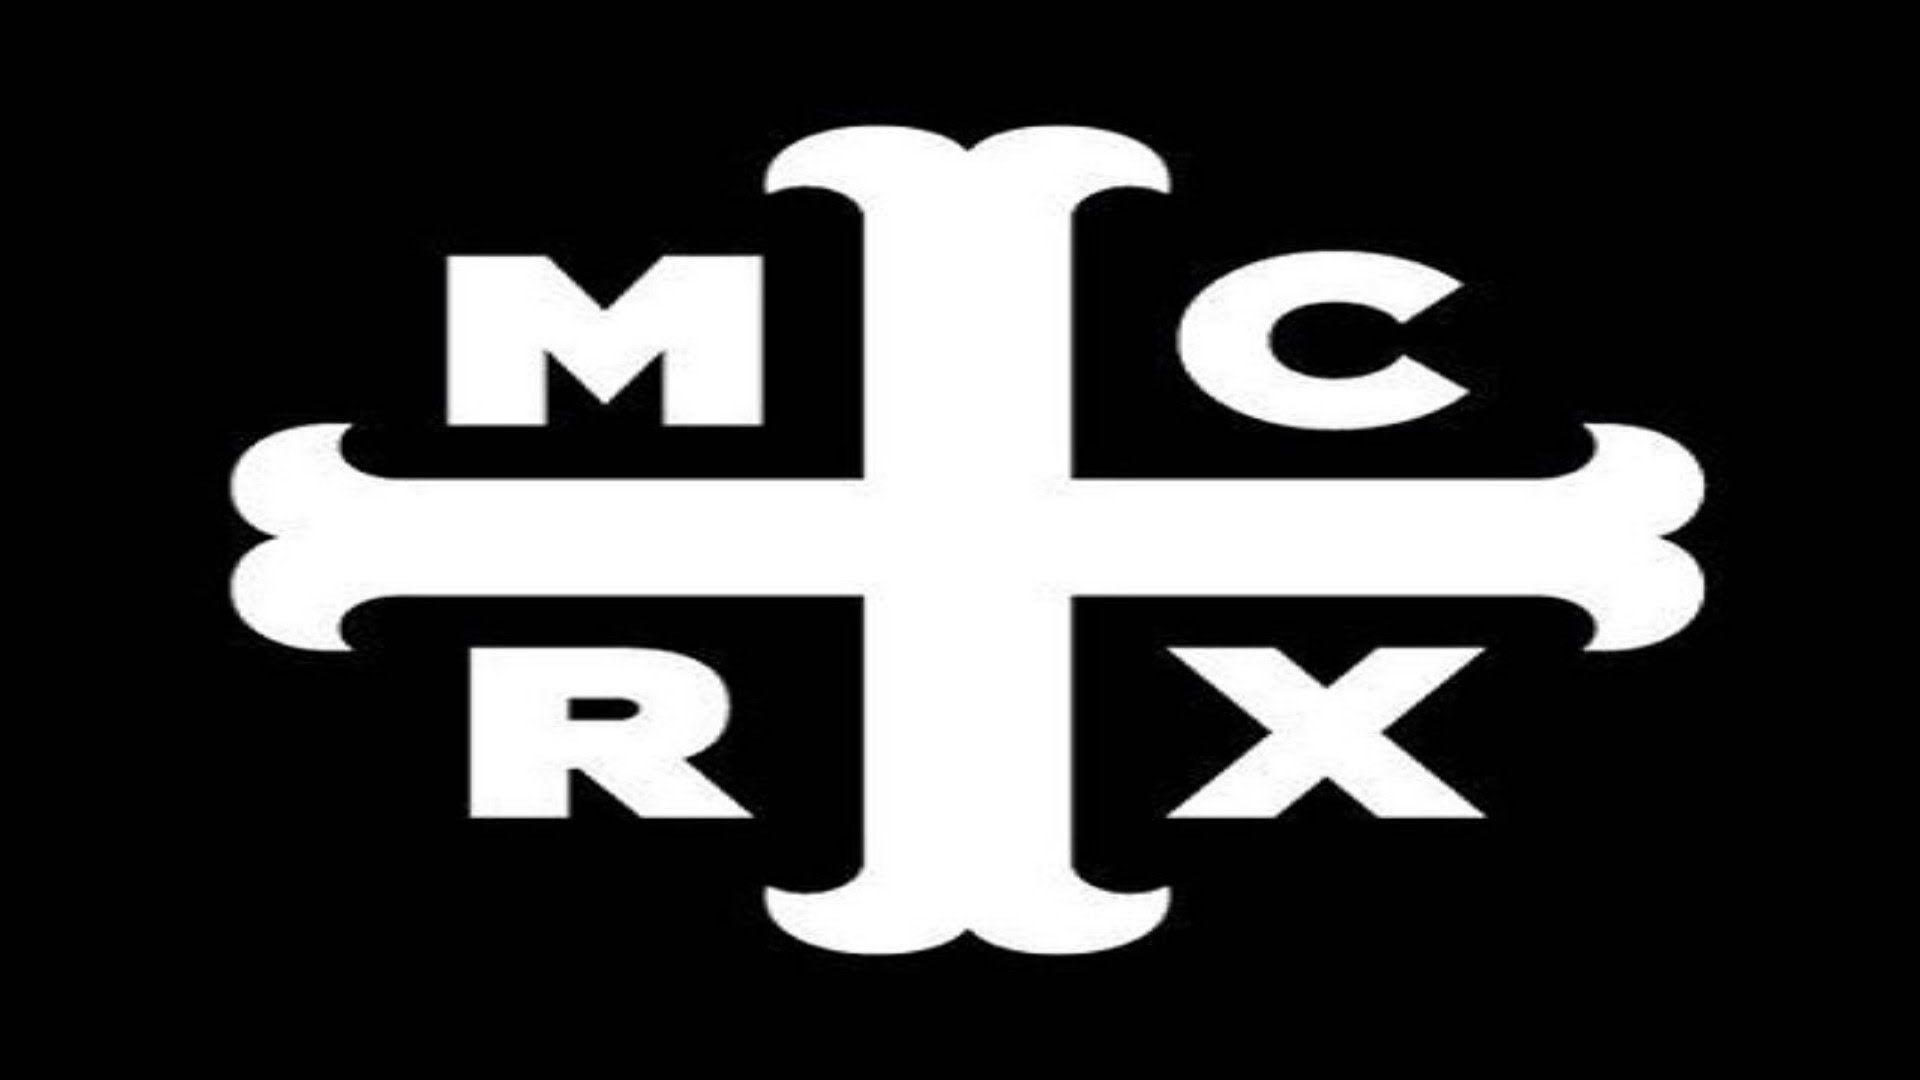 Mcrx Logo - 10 Mcr drawing mcrx for free download on ayoqq cliparts